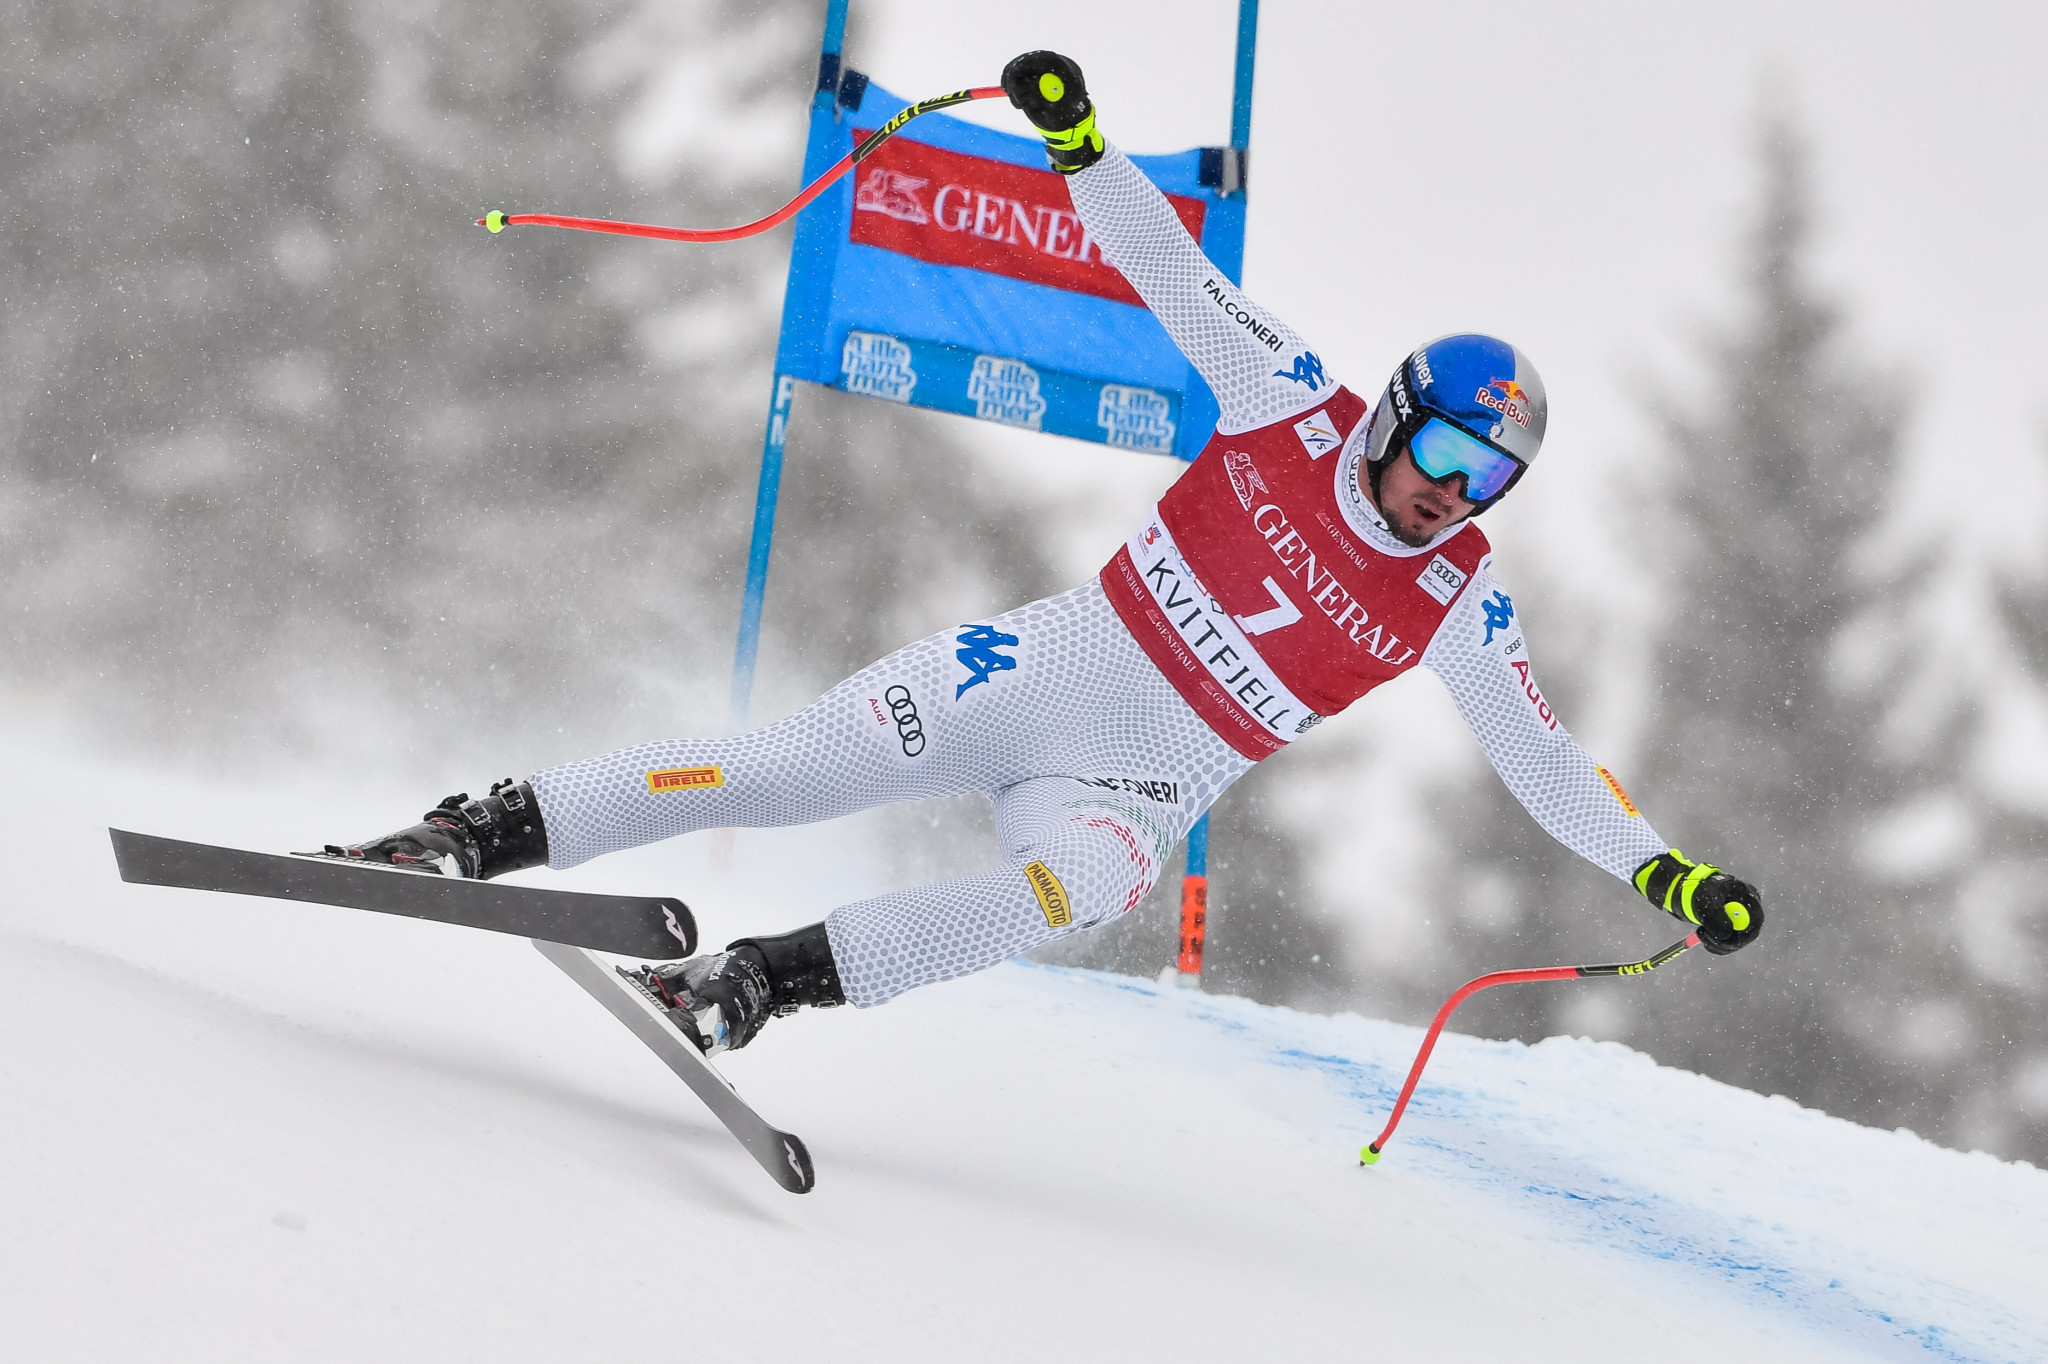 Paris takes overall super-G lead with second victory at FIS Alpine Skiing World Cup in Kvitfjell